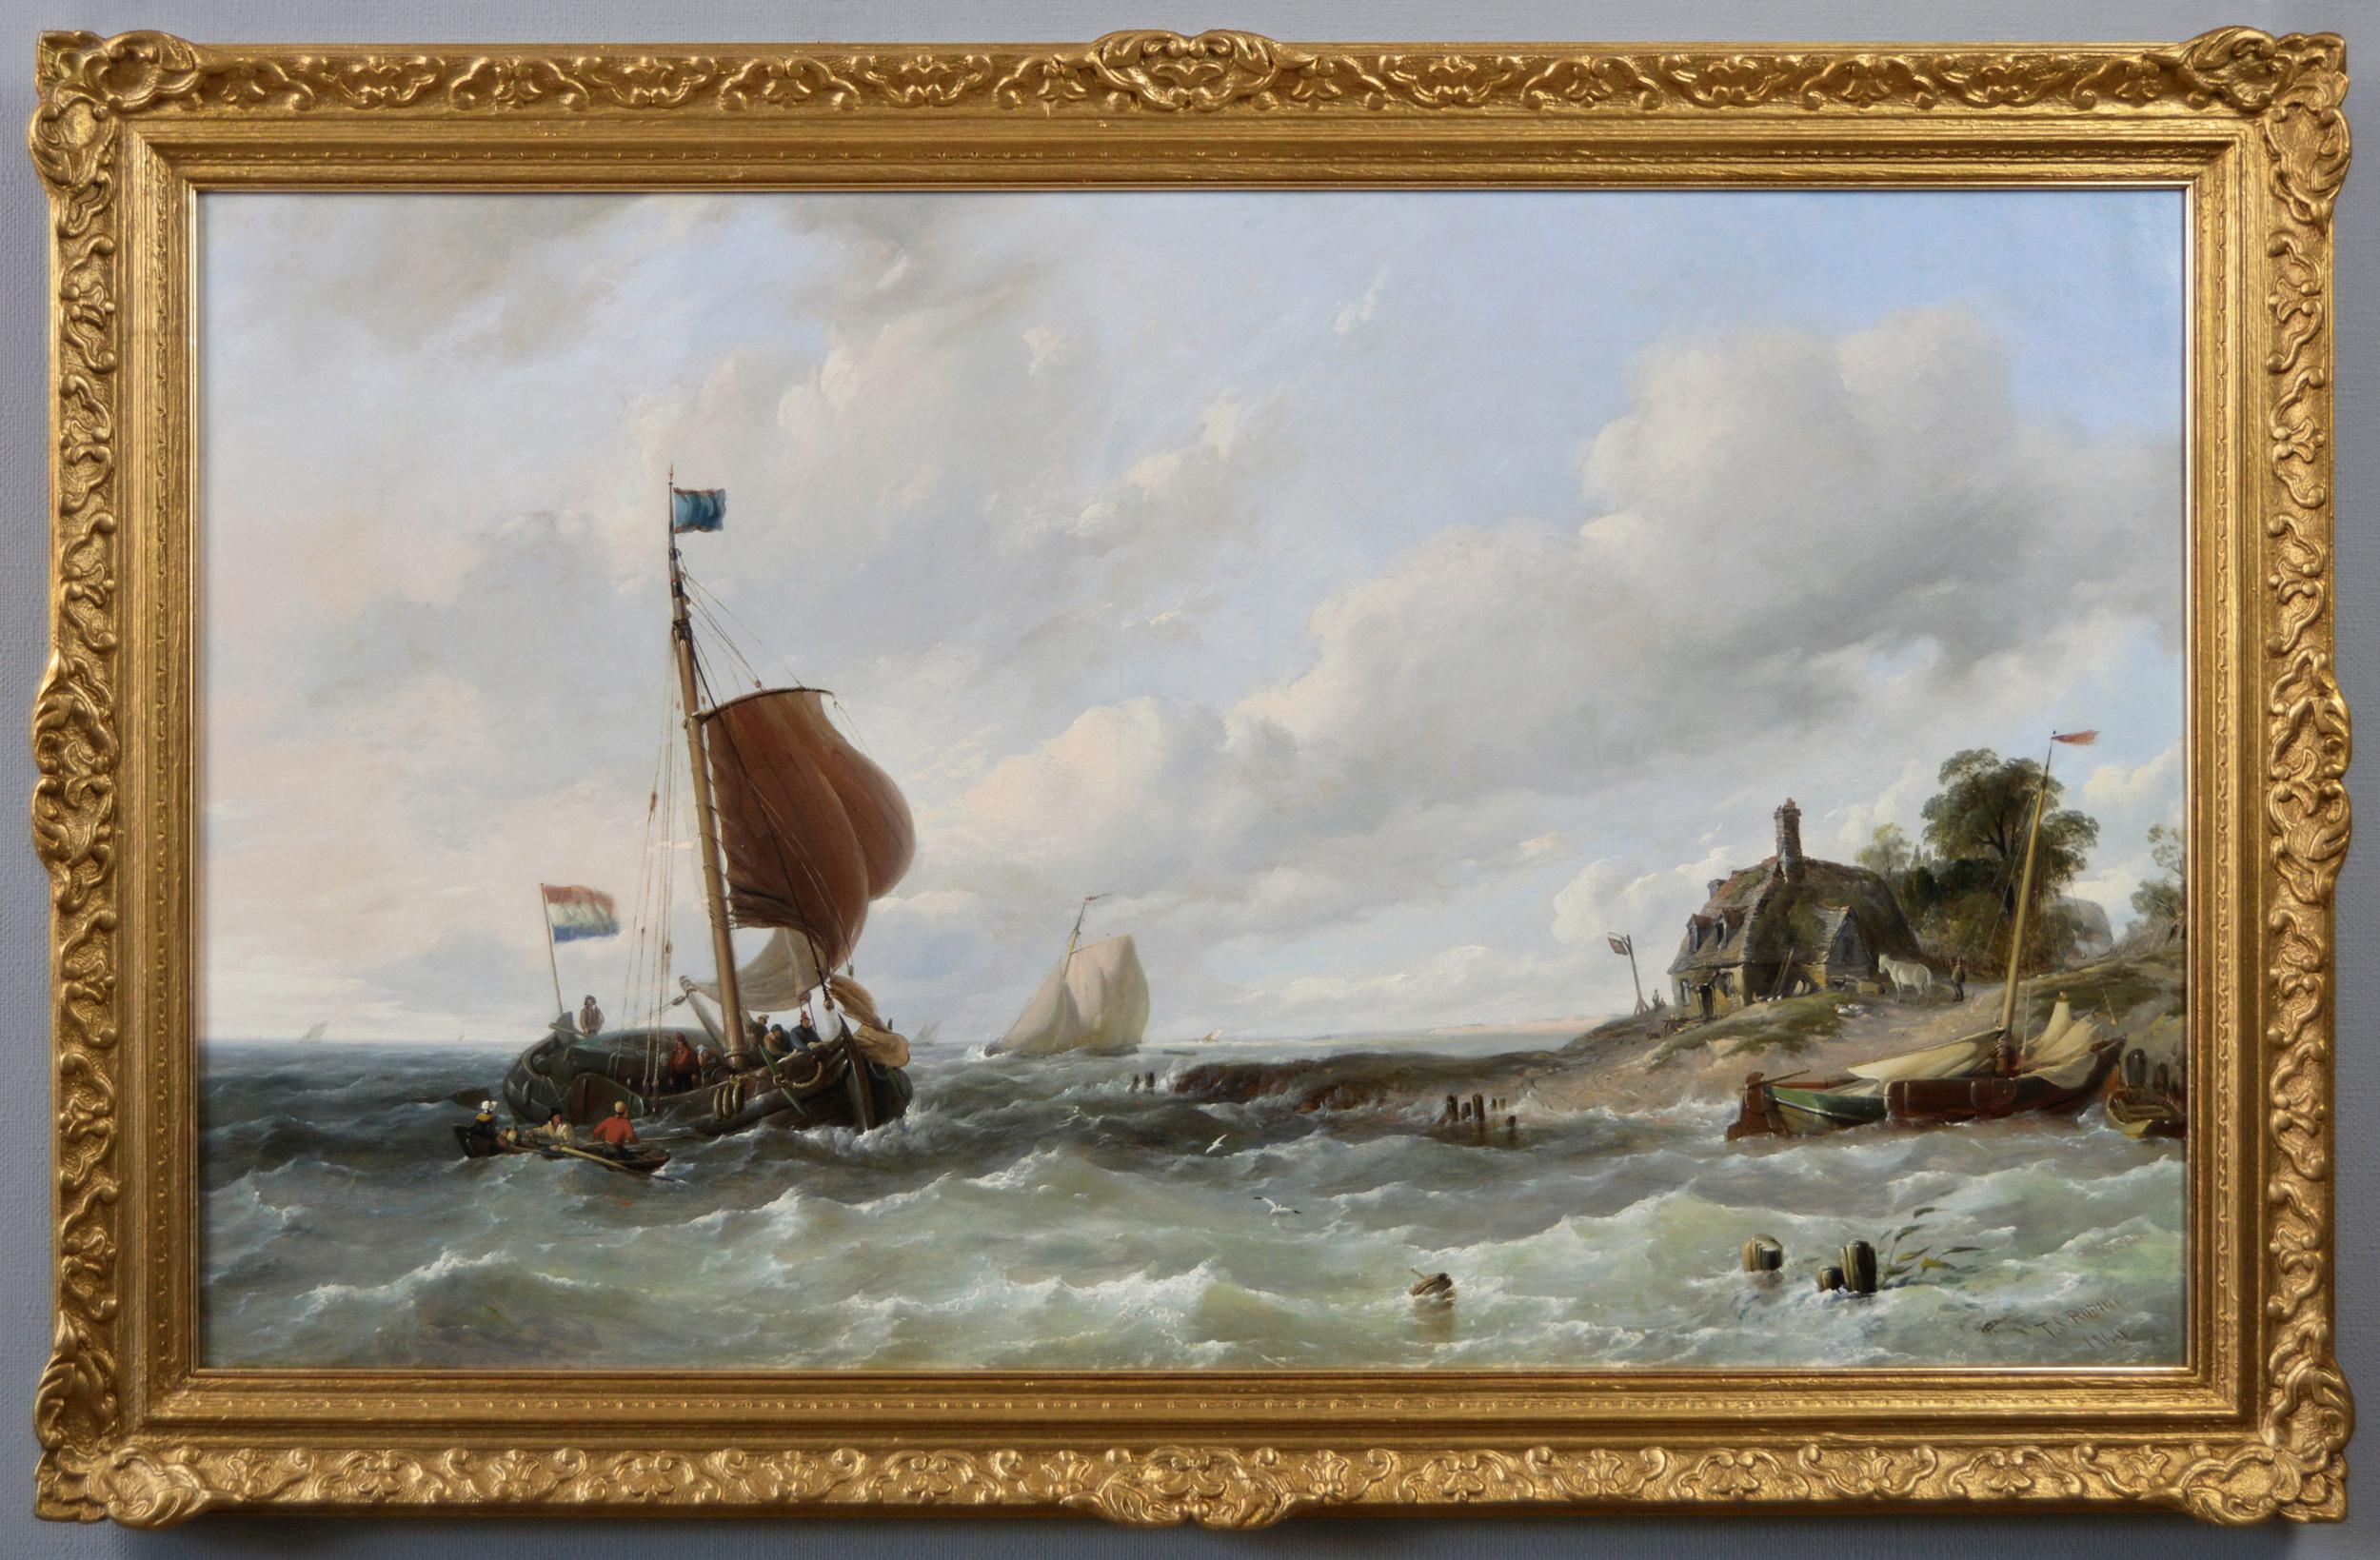 Thomas Sewell Robins Landscape Painting - 19th Century seascape oil painting of ships off the Dutch coast 